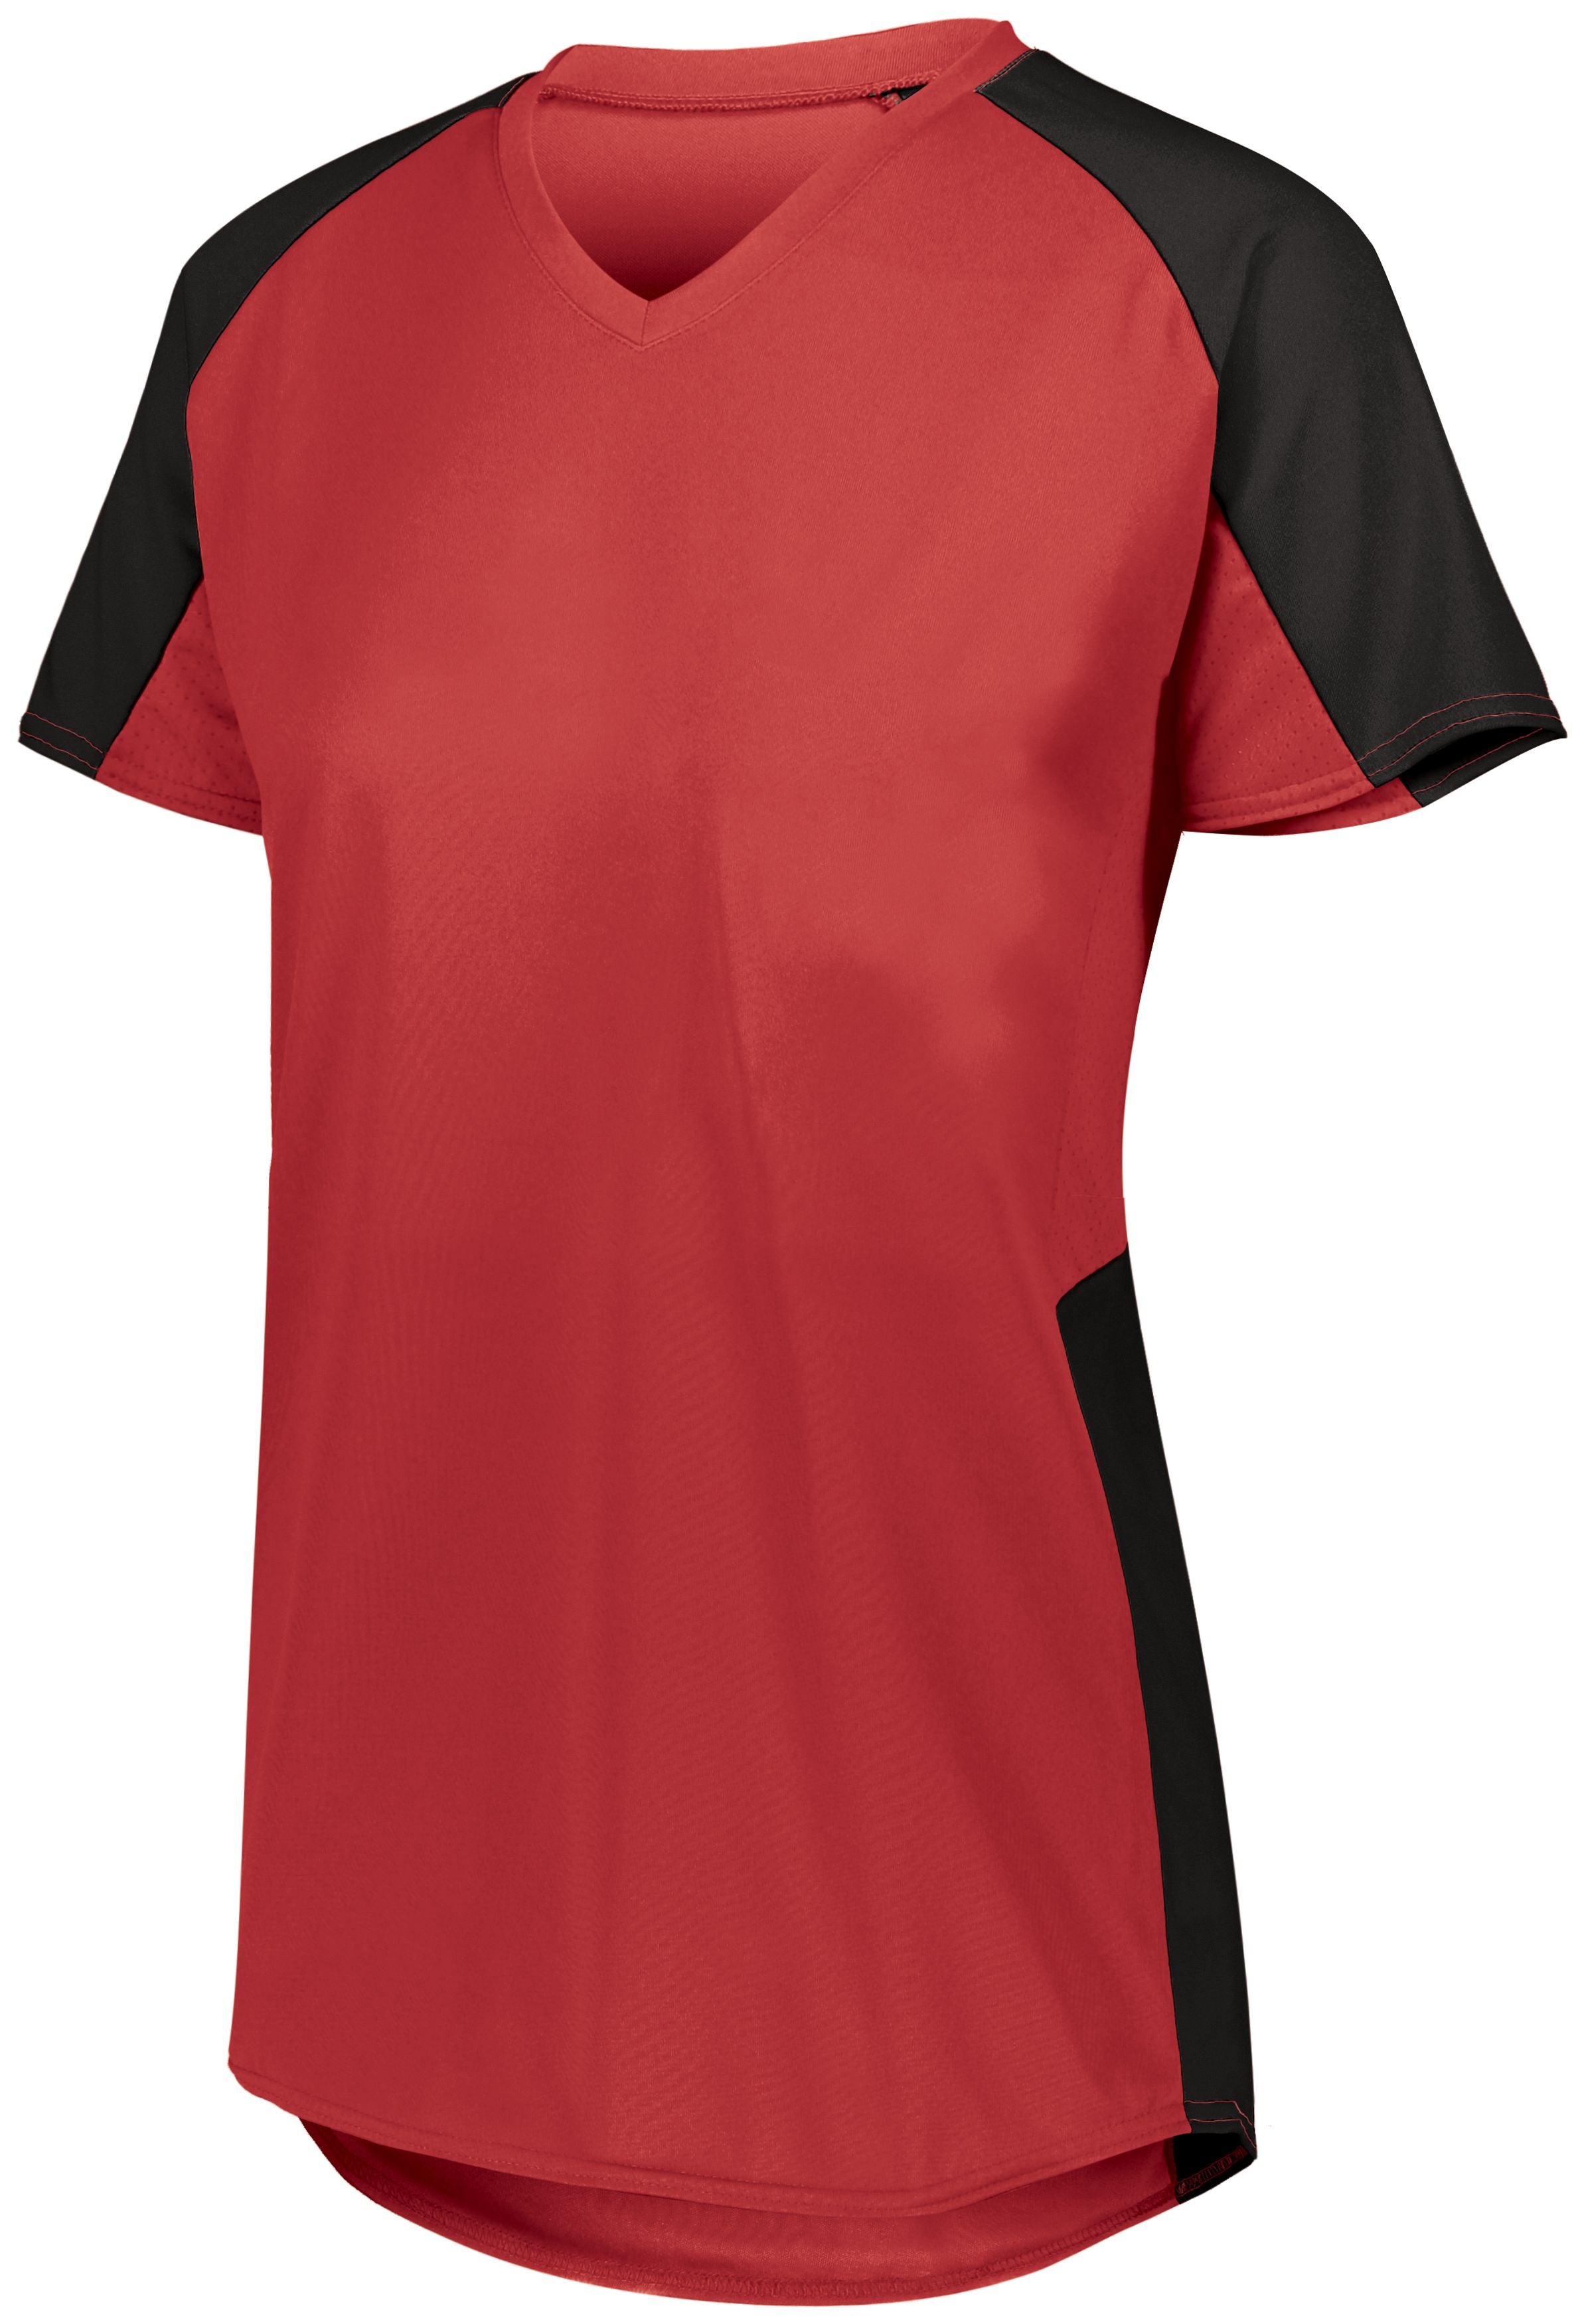 Augusta Sportswear Ladies Cutter Jersey in Red/Black  -Part of the Ladies, Ladies-Jersey, Augusta-Products, Softball, Shirts product lines at KanaleyCreations.com